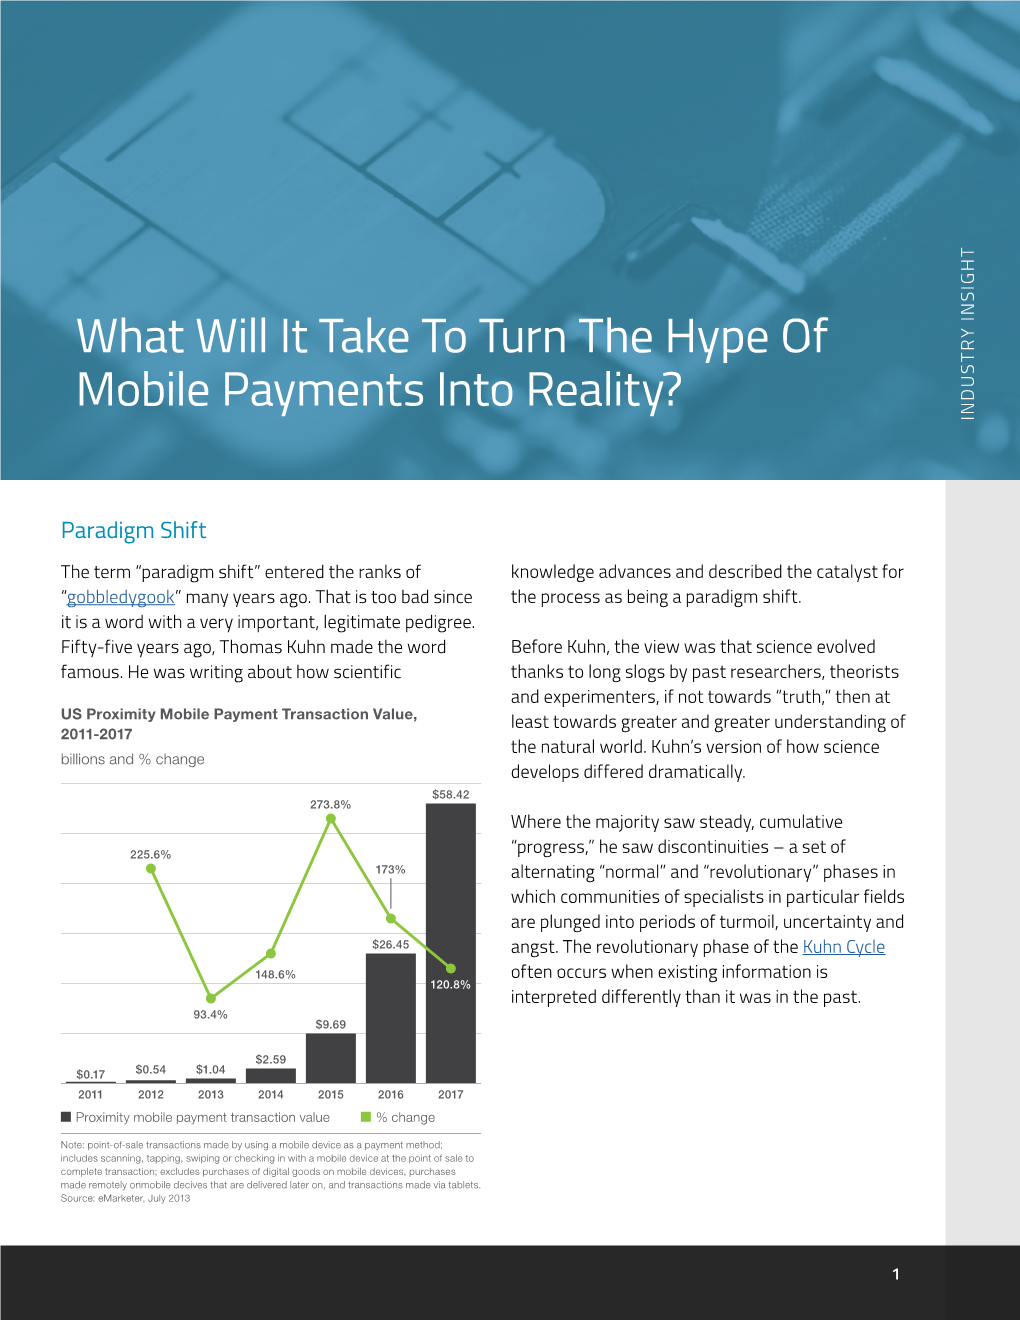 What Will It Take to Turn the Hype of Mobile Payments Into Reality? INDUSTRY INSIGHT